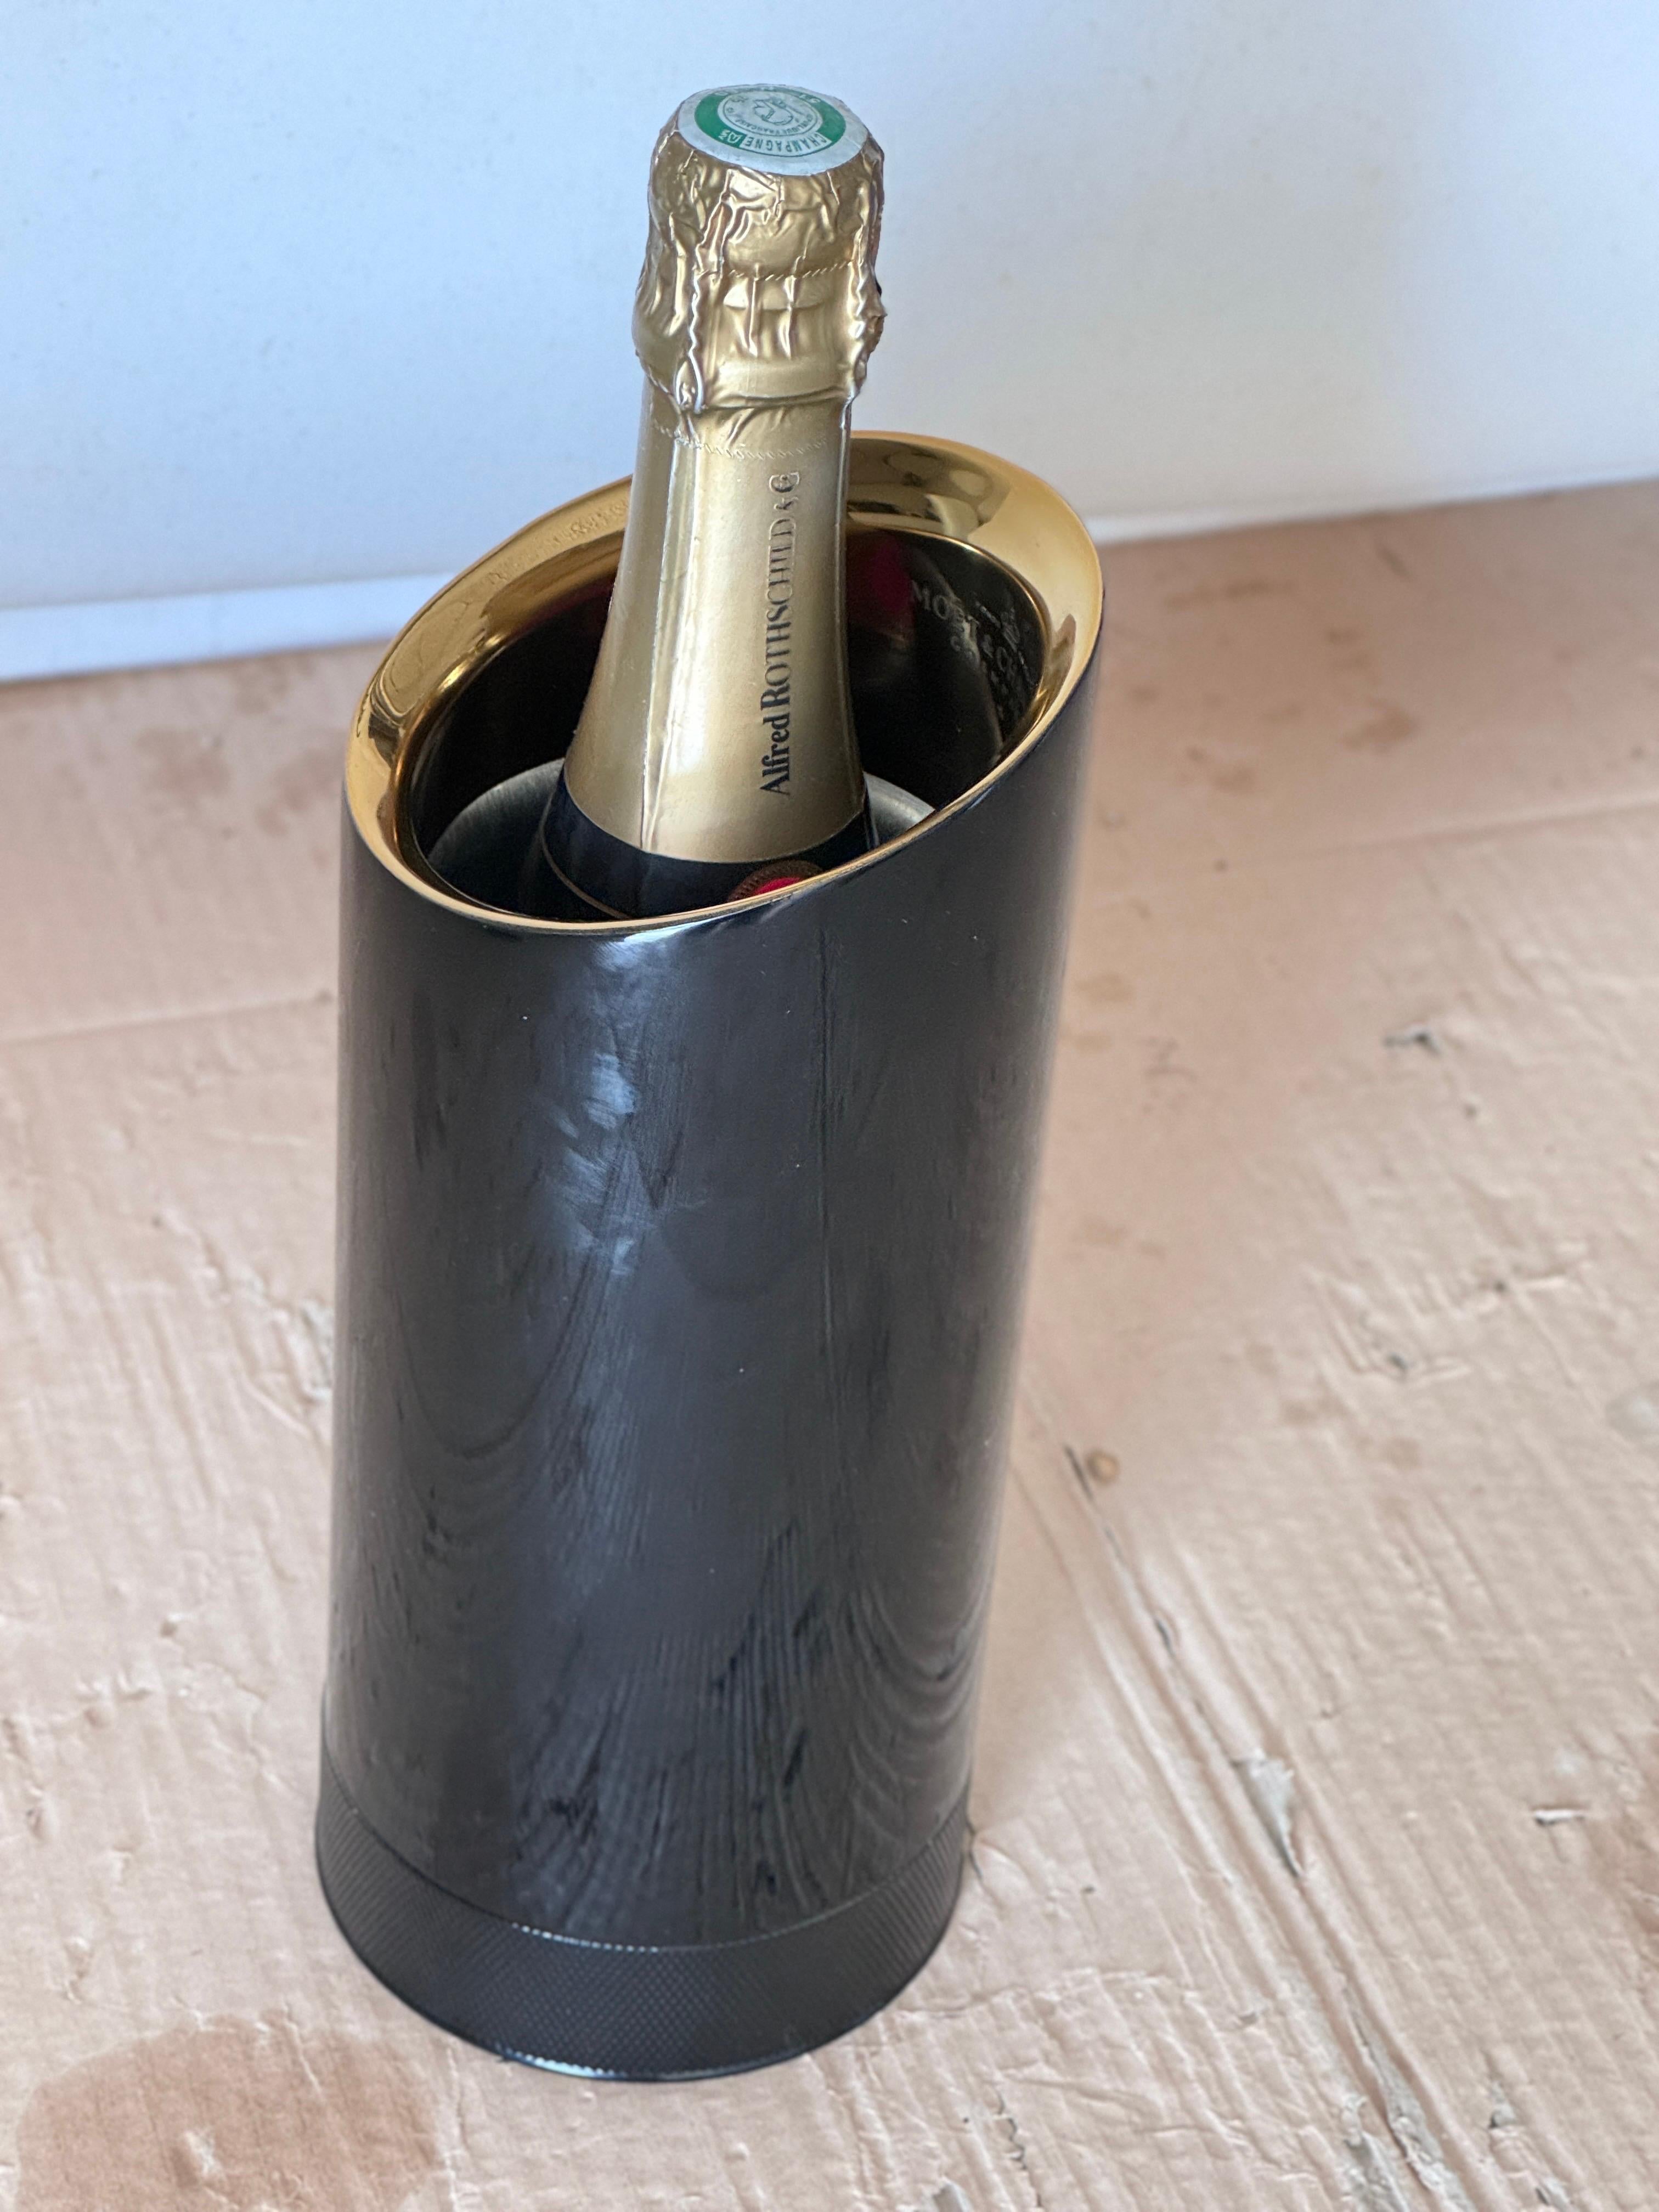 Moet & Chandon Champagne Cooler Metal Black and White Color by Jean Marc Gady.

The object is a metal cylinder, which unscrews, and in which there is another aluminum cylinder, which is put in the freezer at a negative temperature.
Then we replace